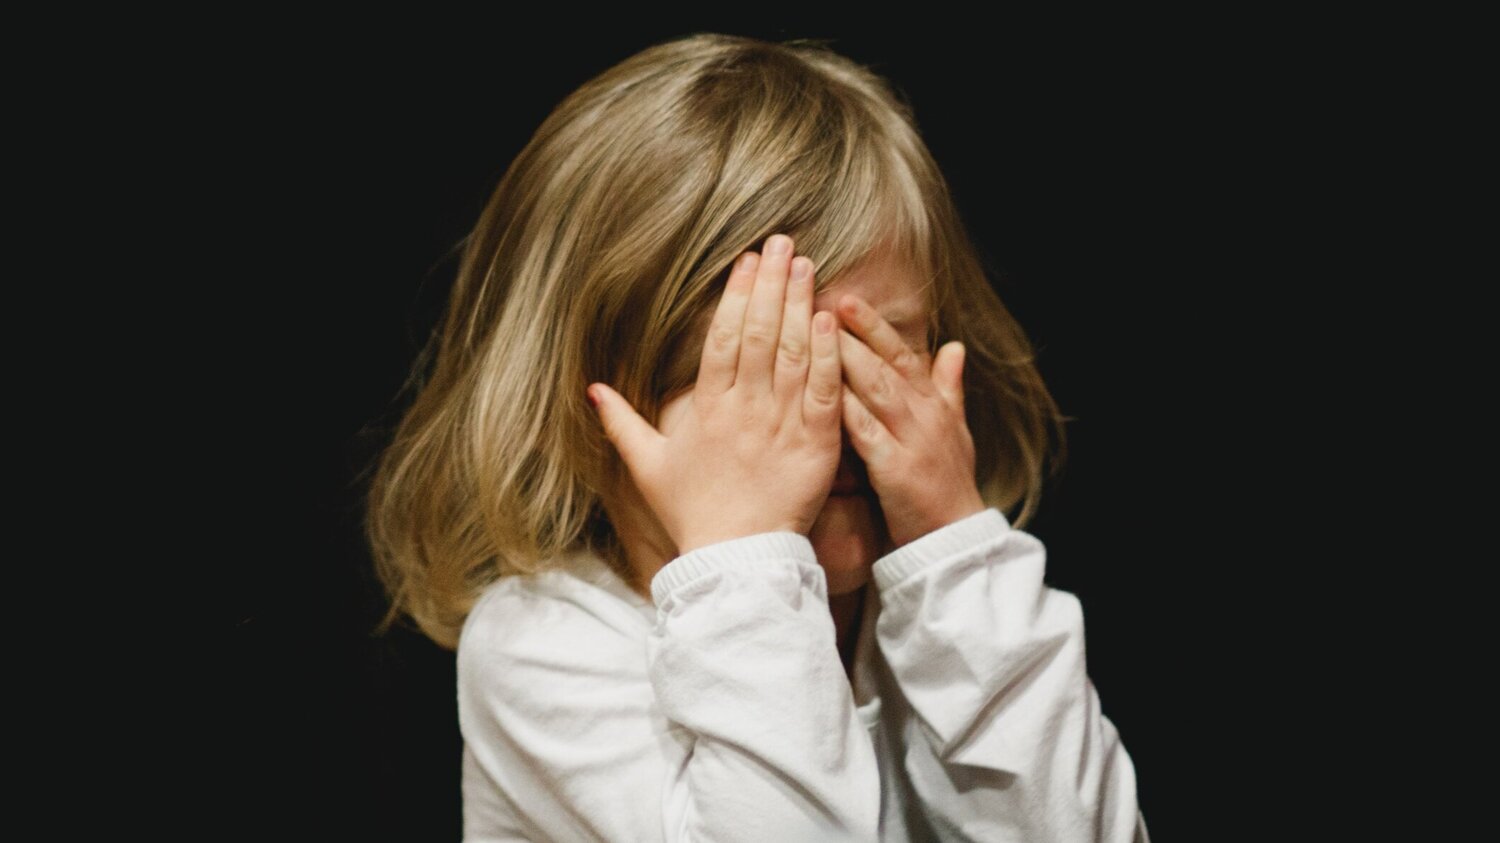 Young girl covering her eyes